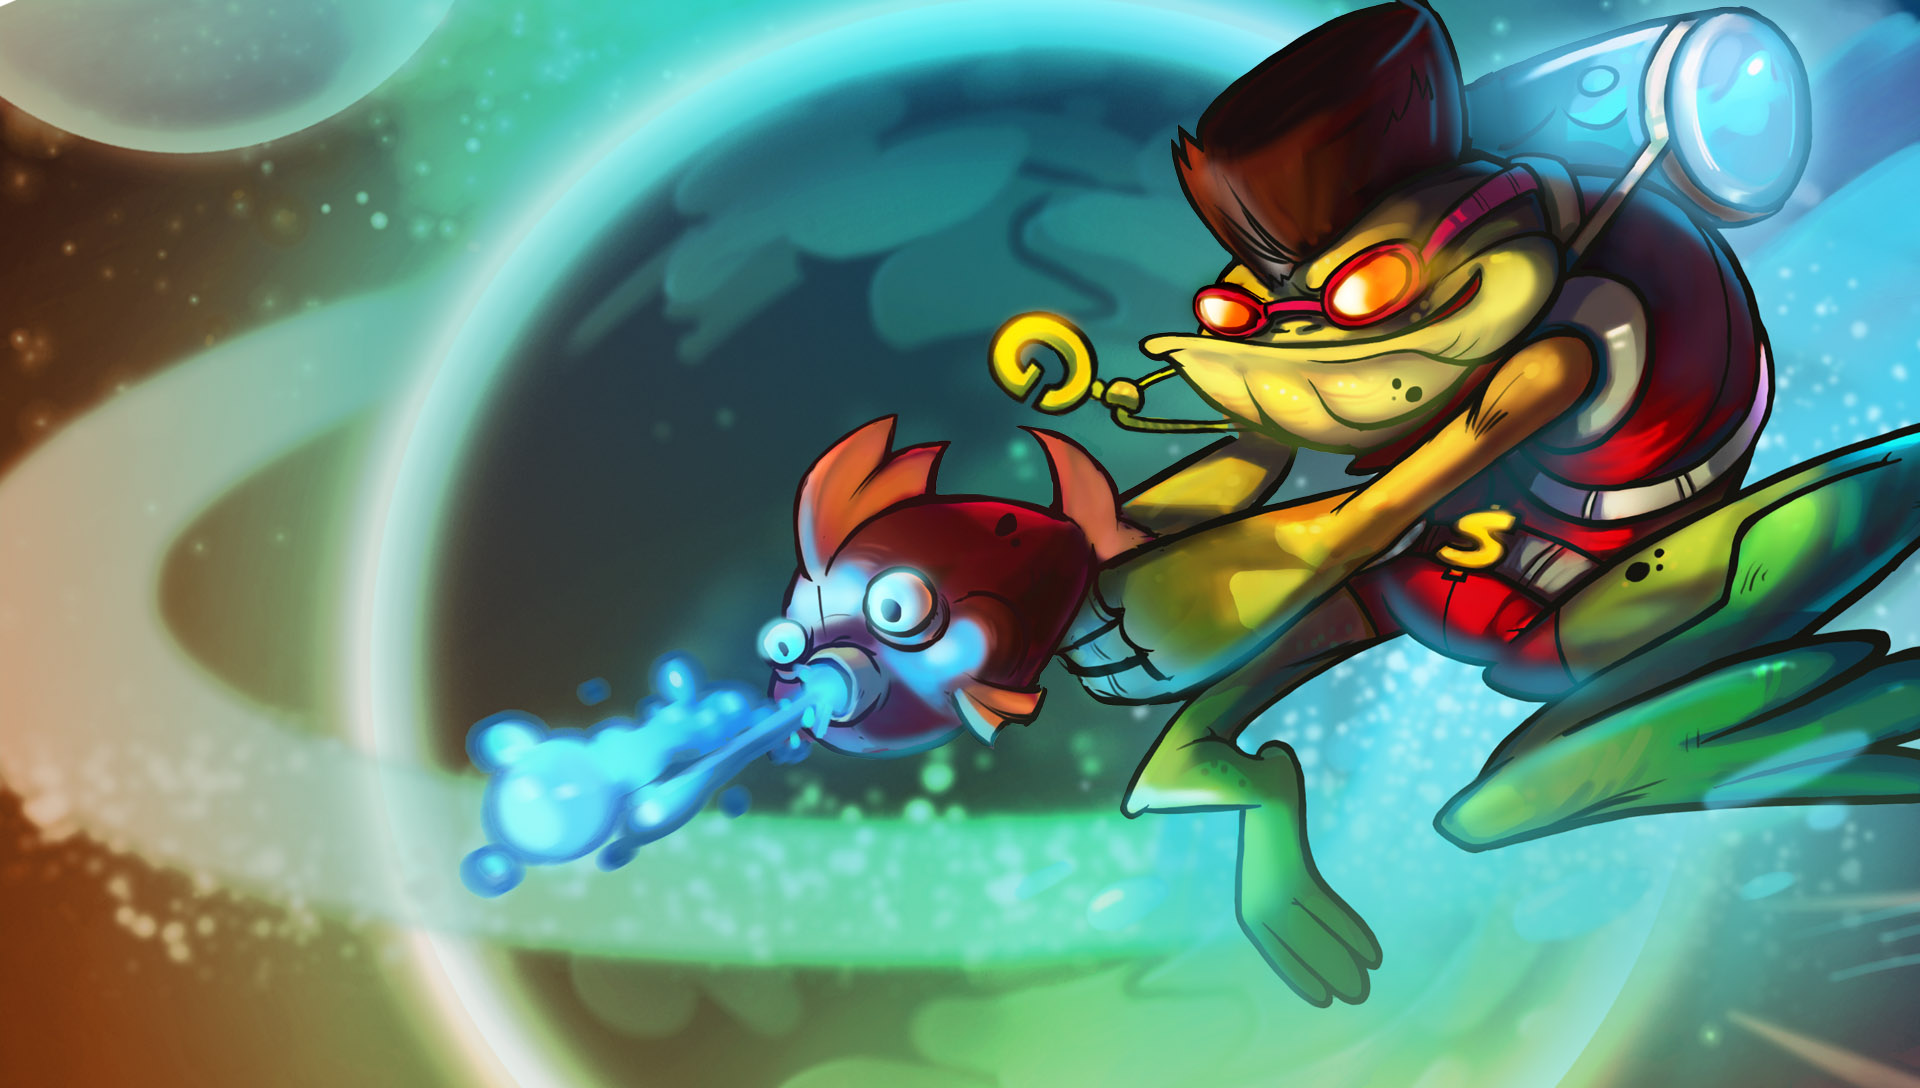 Awesomenauts Image Steam Trading Cards Artwork HD Wallpaper And